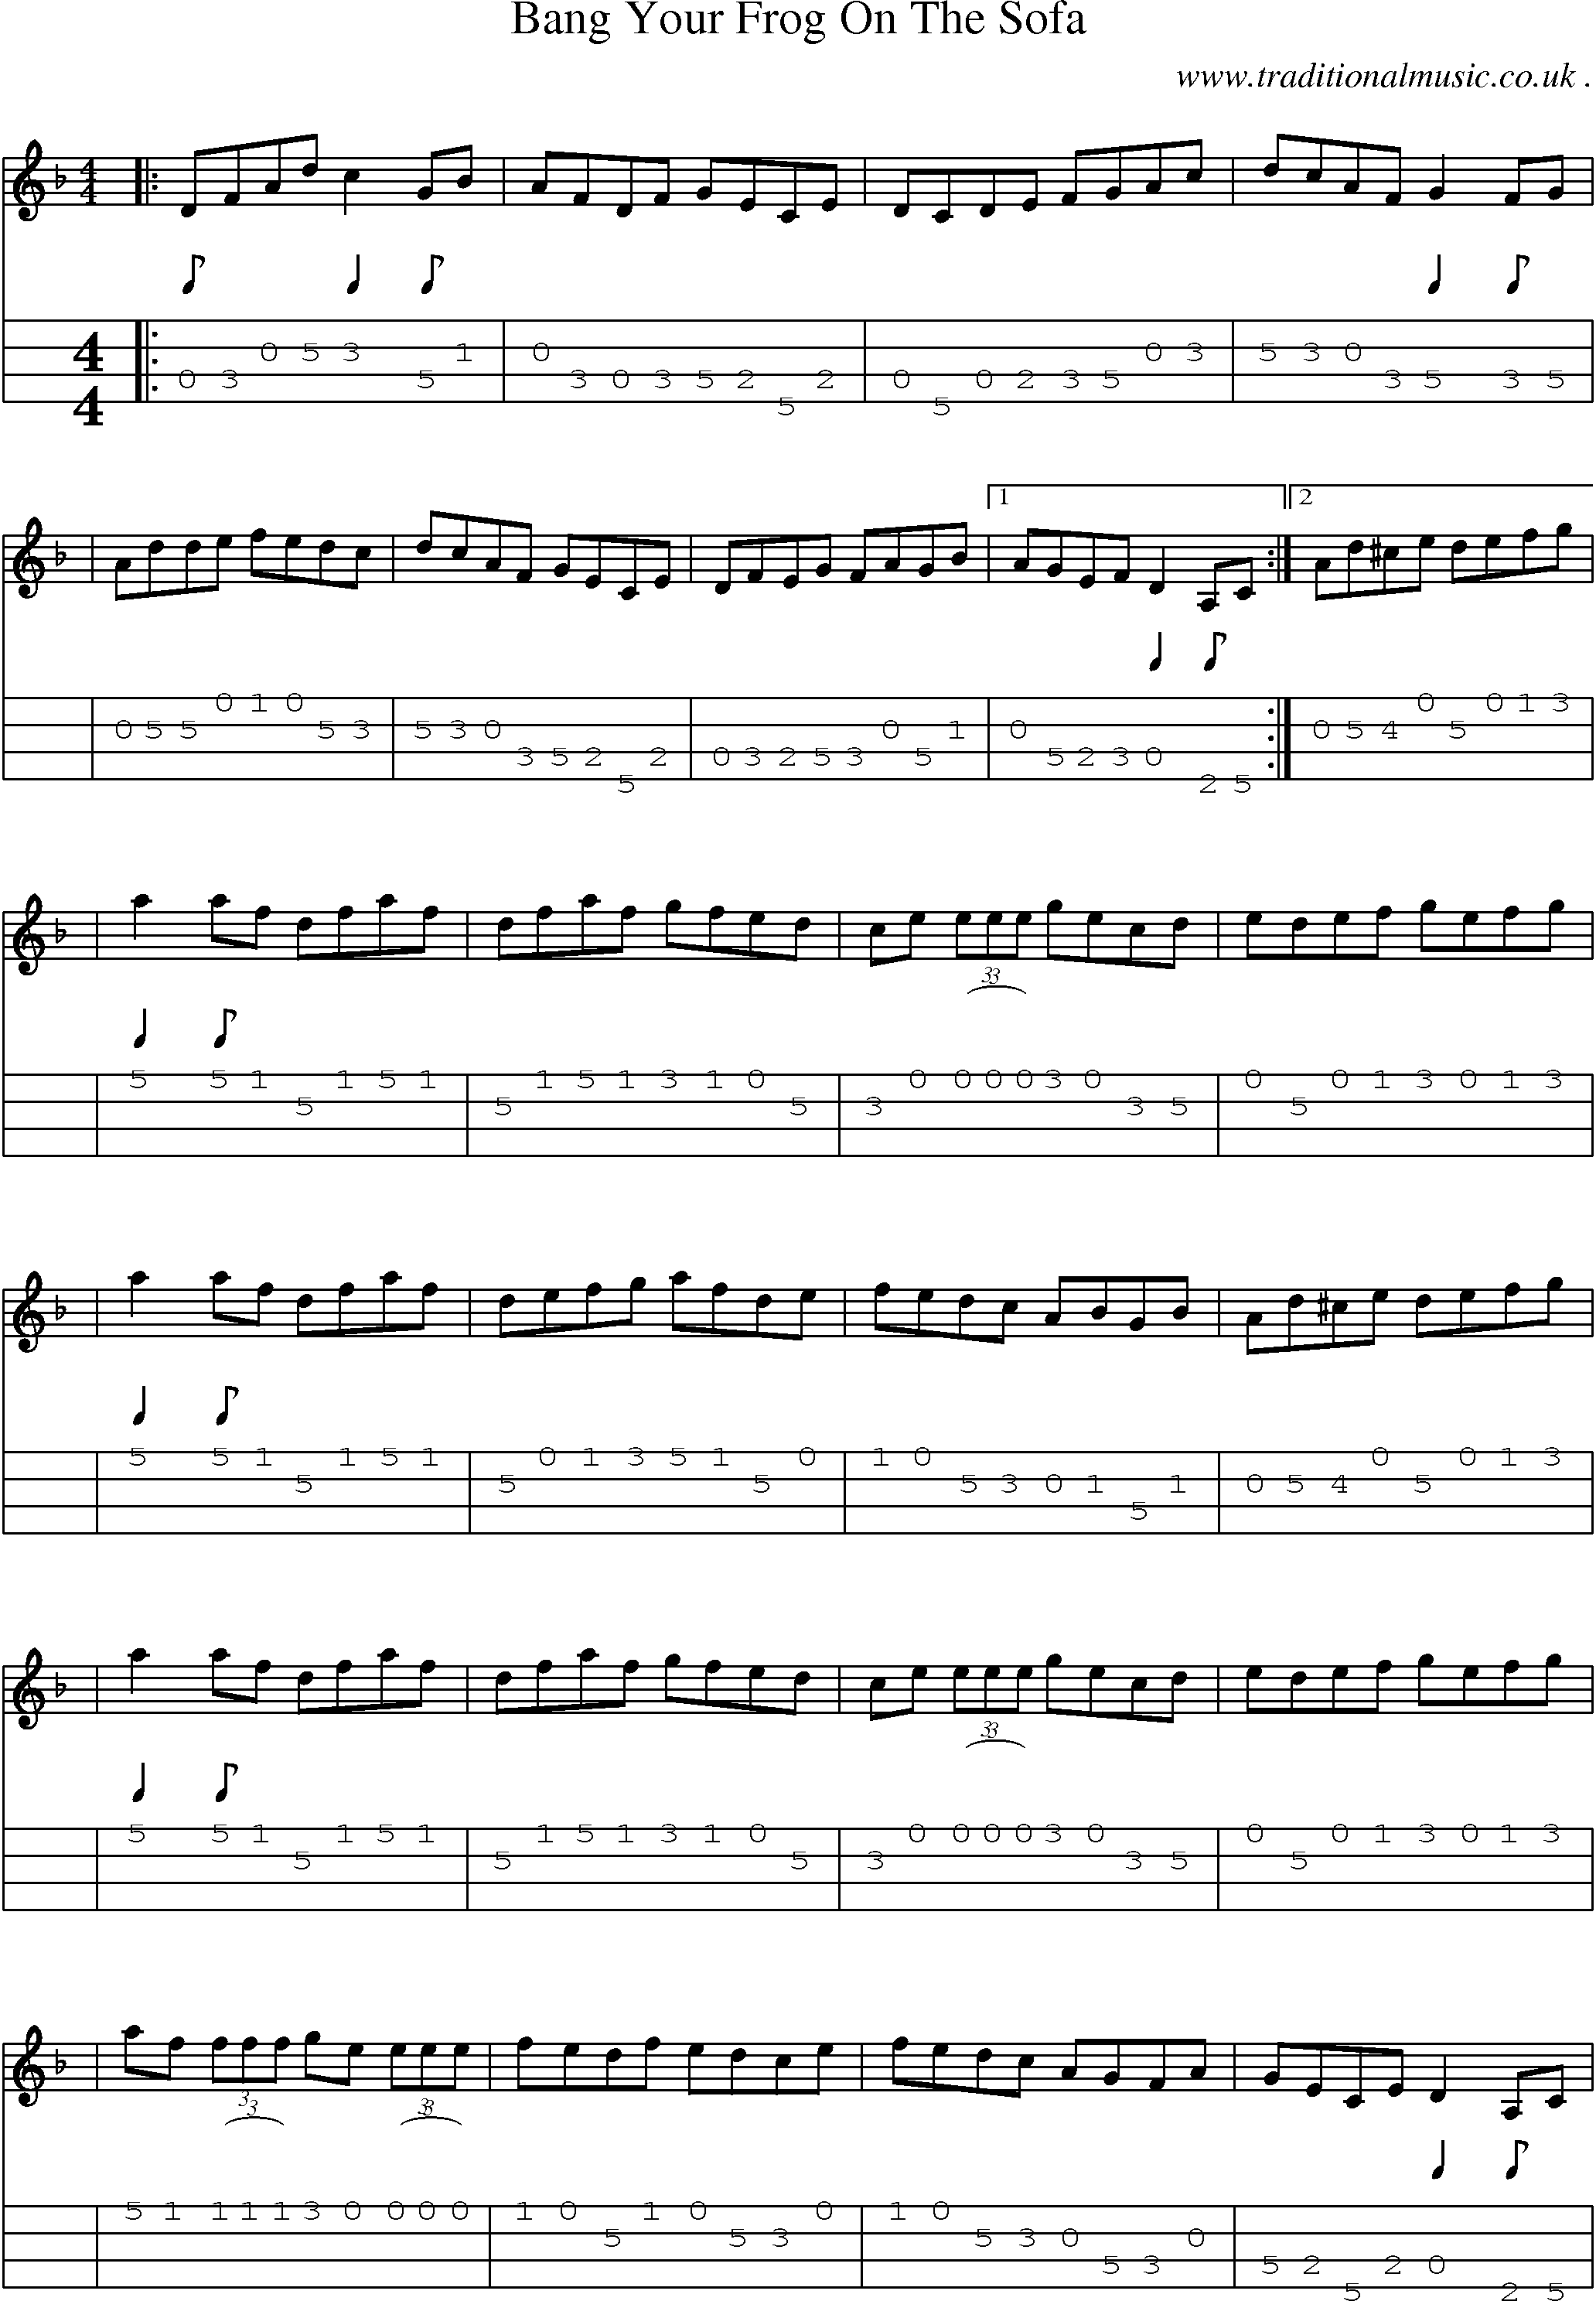 Sheet-Music and Mandolin Tabs for Bang Your Frog On The Sofa